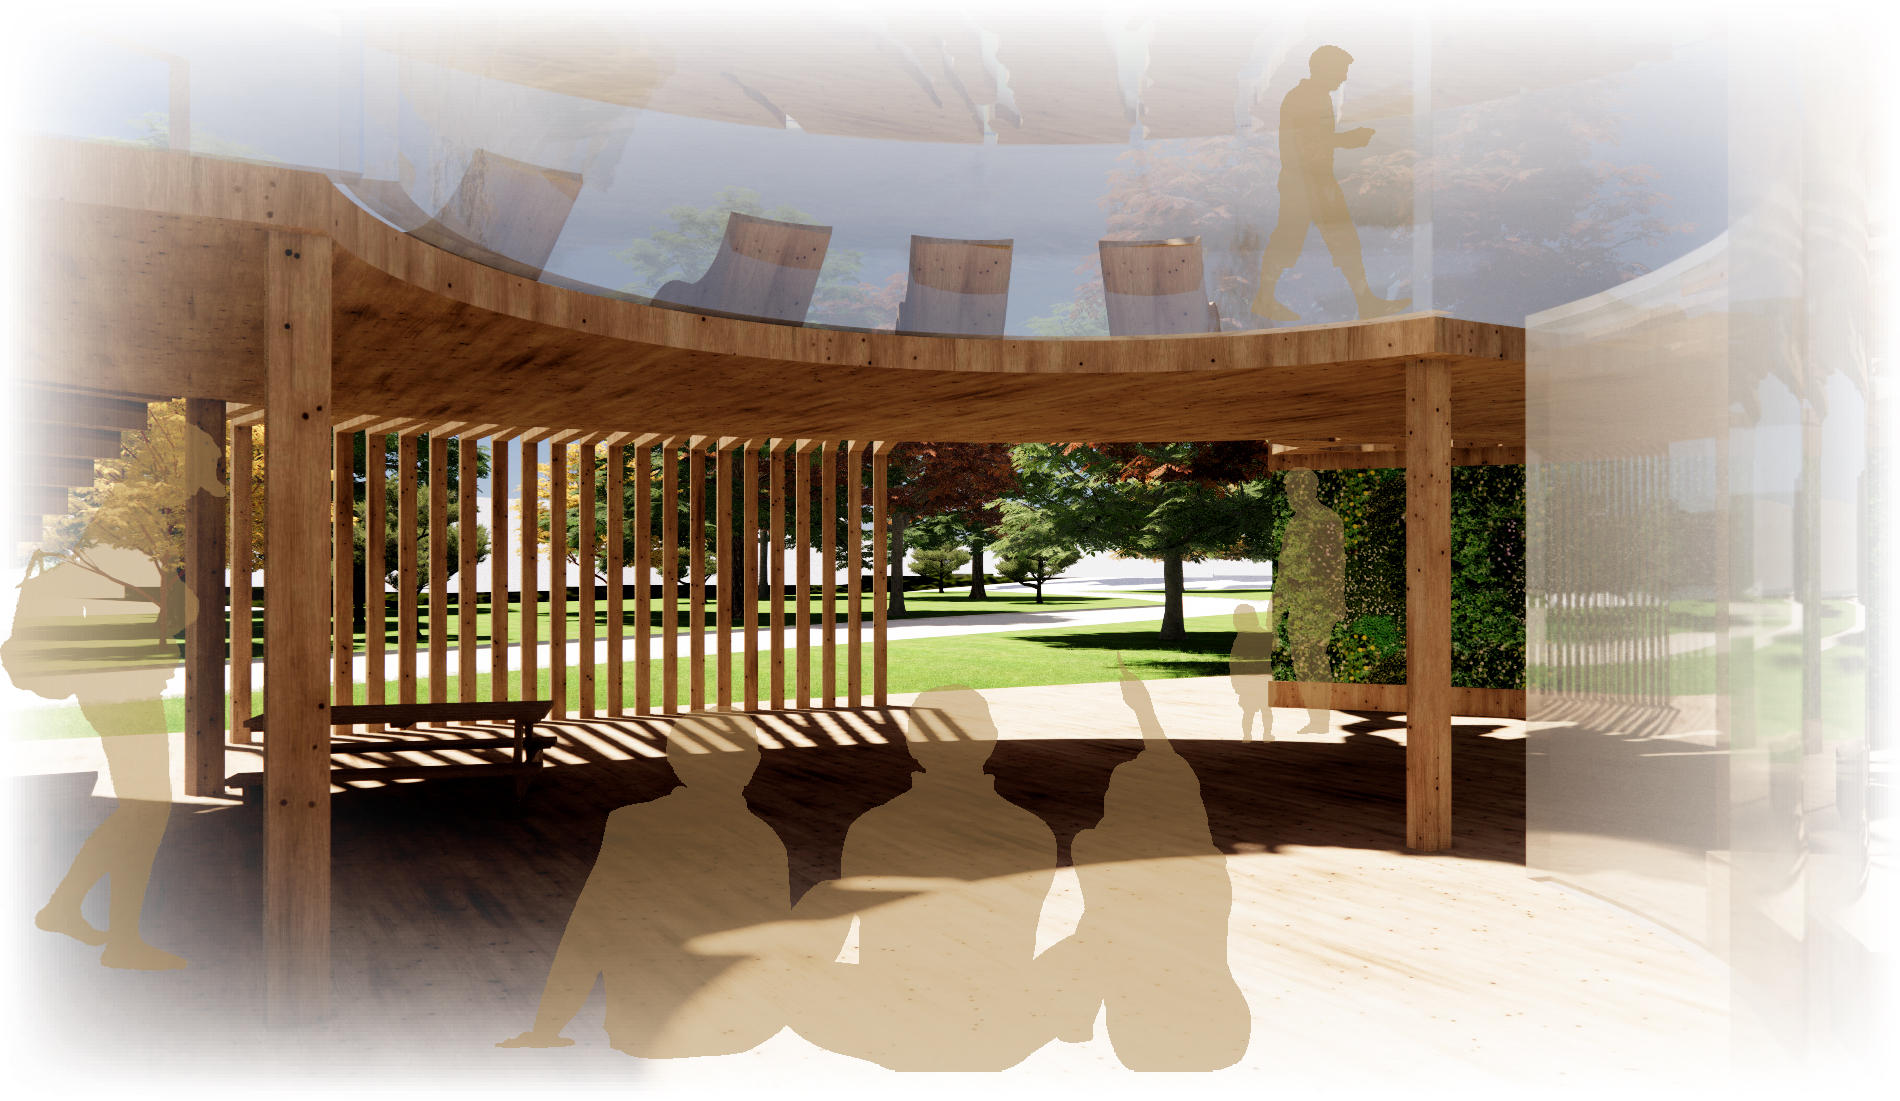 Render image of the partially covered outdoor space overlooking a pod.